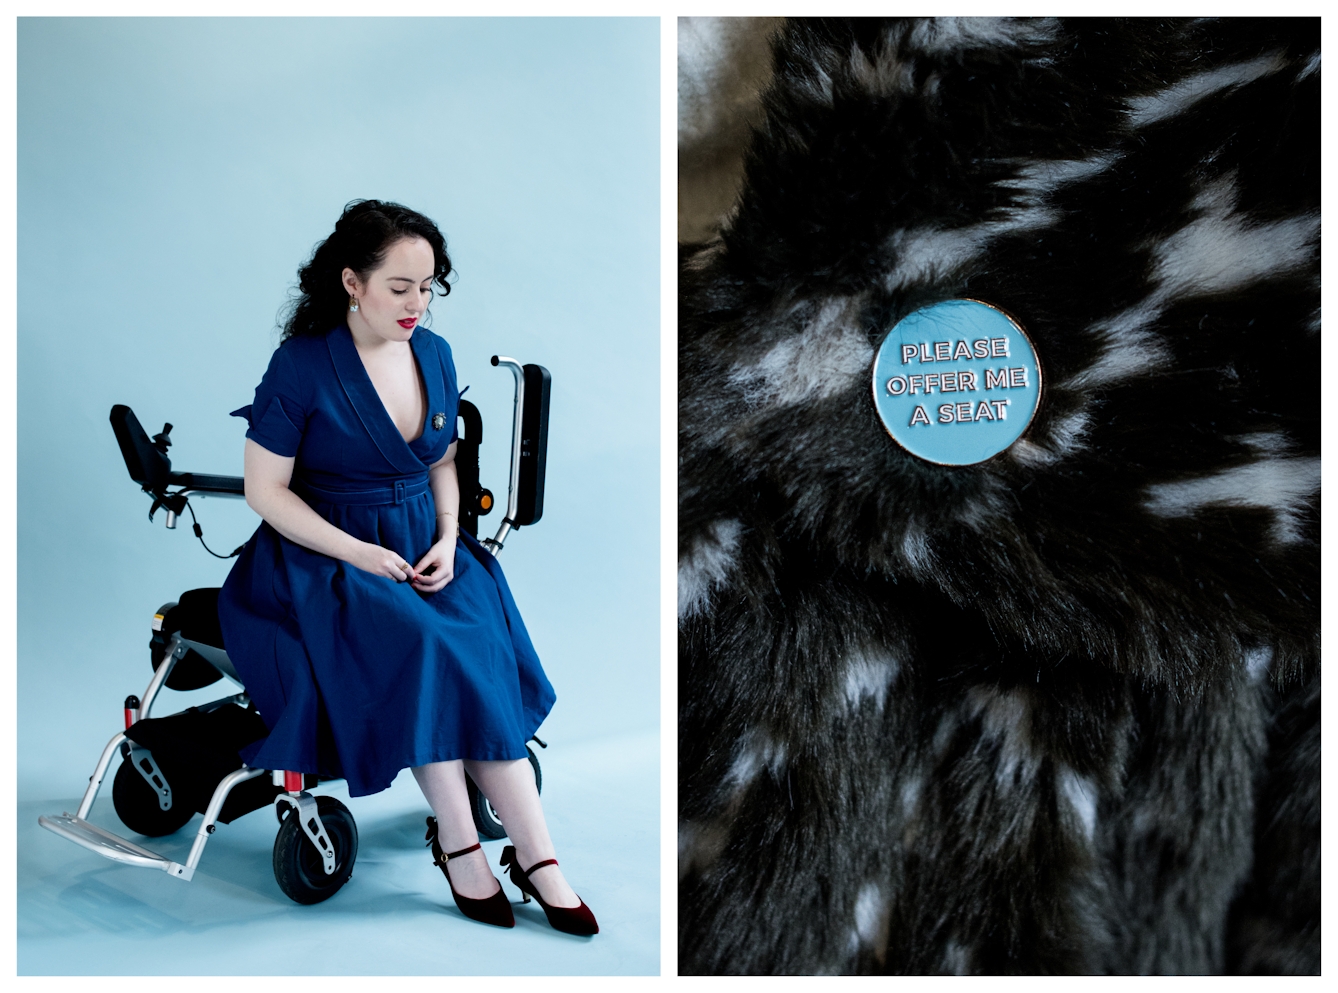 Photographic diptych. The image on the left shows a young woman in a blue dress against a light blue background, seated sideways on her wheelchair. She is looking down towards her feet. The image on the right shows a close-up of  the shoulder of a faux fur coat with a small circular badge attached. The badge reads, 'Please offer me a seat'.